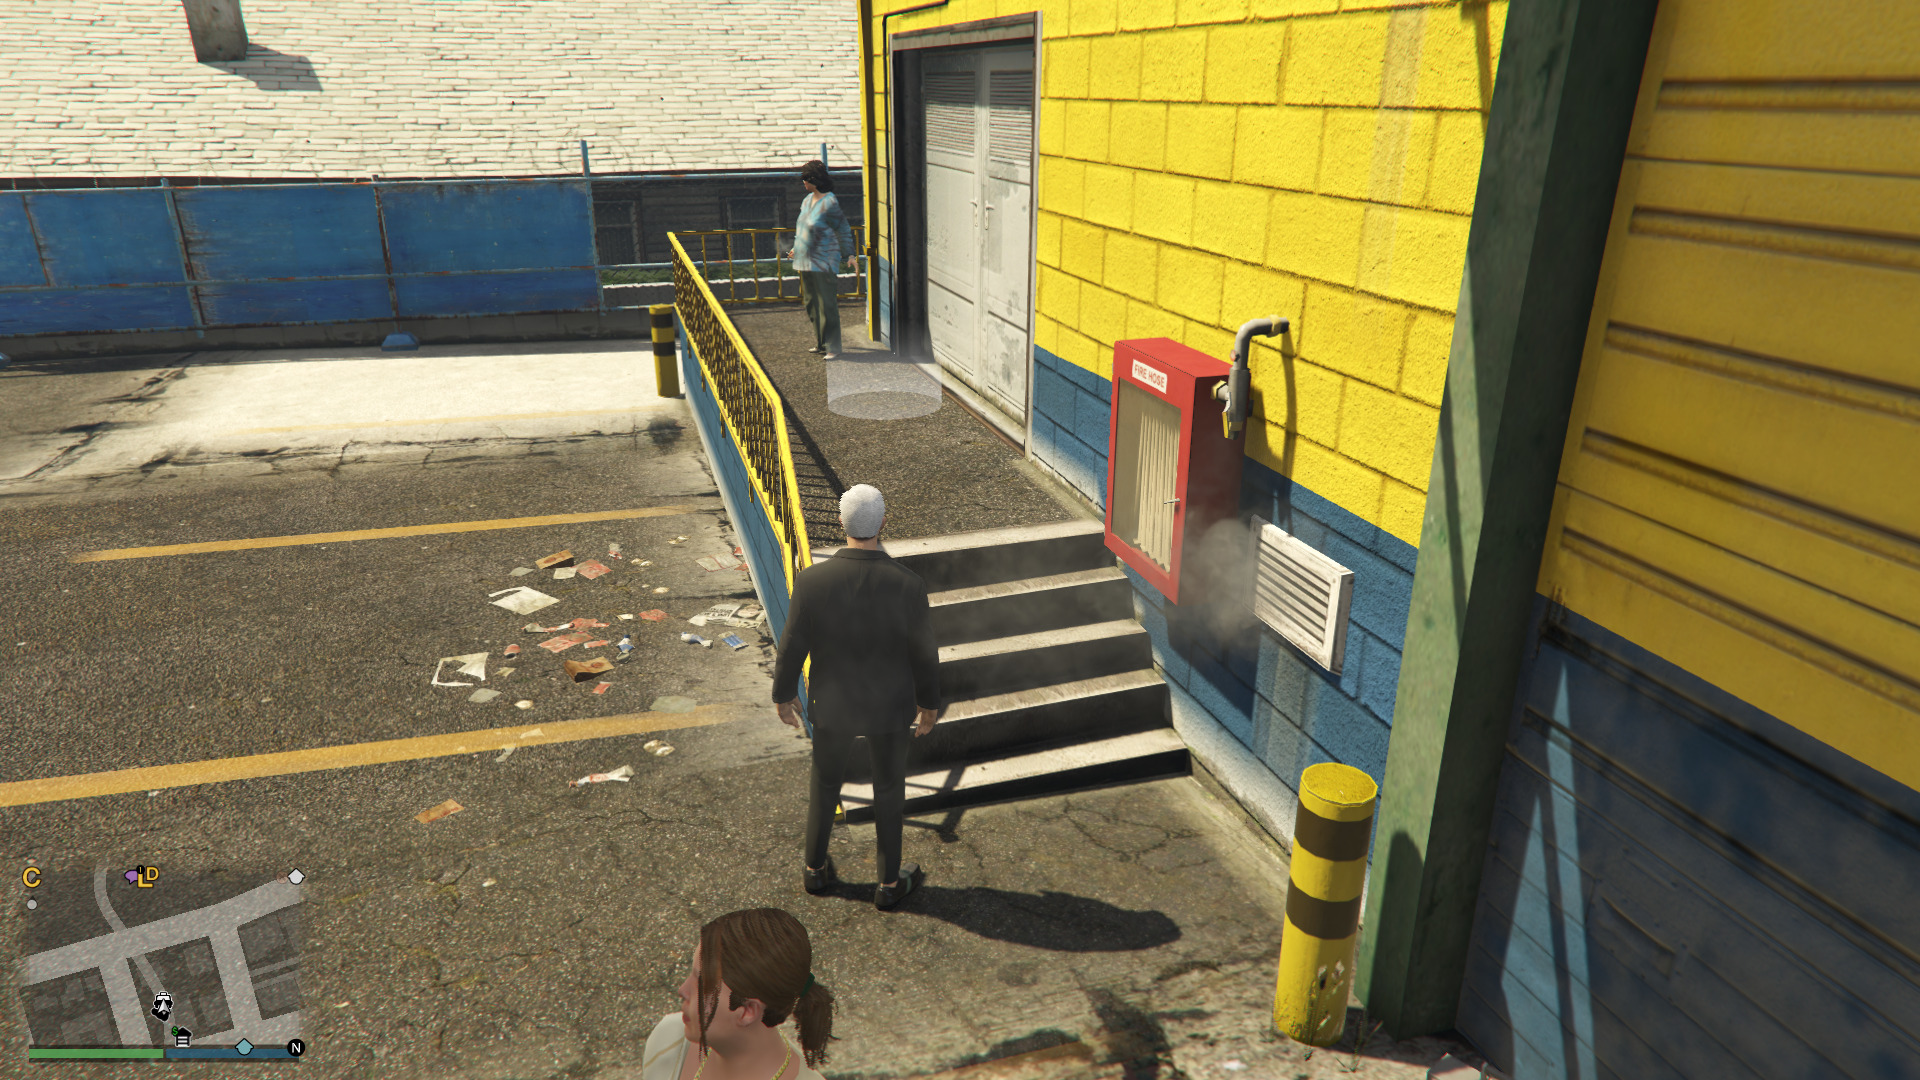 Walk into the while circle to start your taxi business in GTA 5